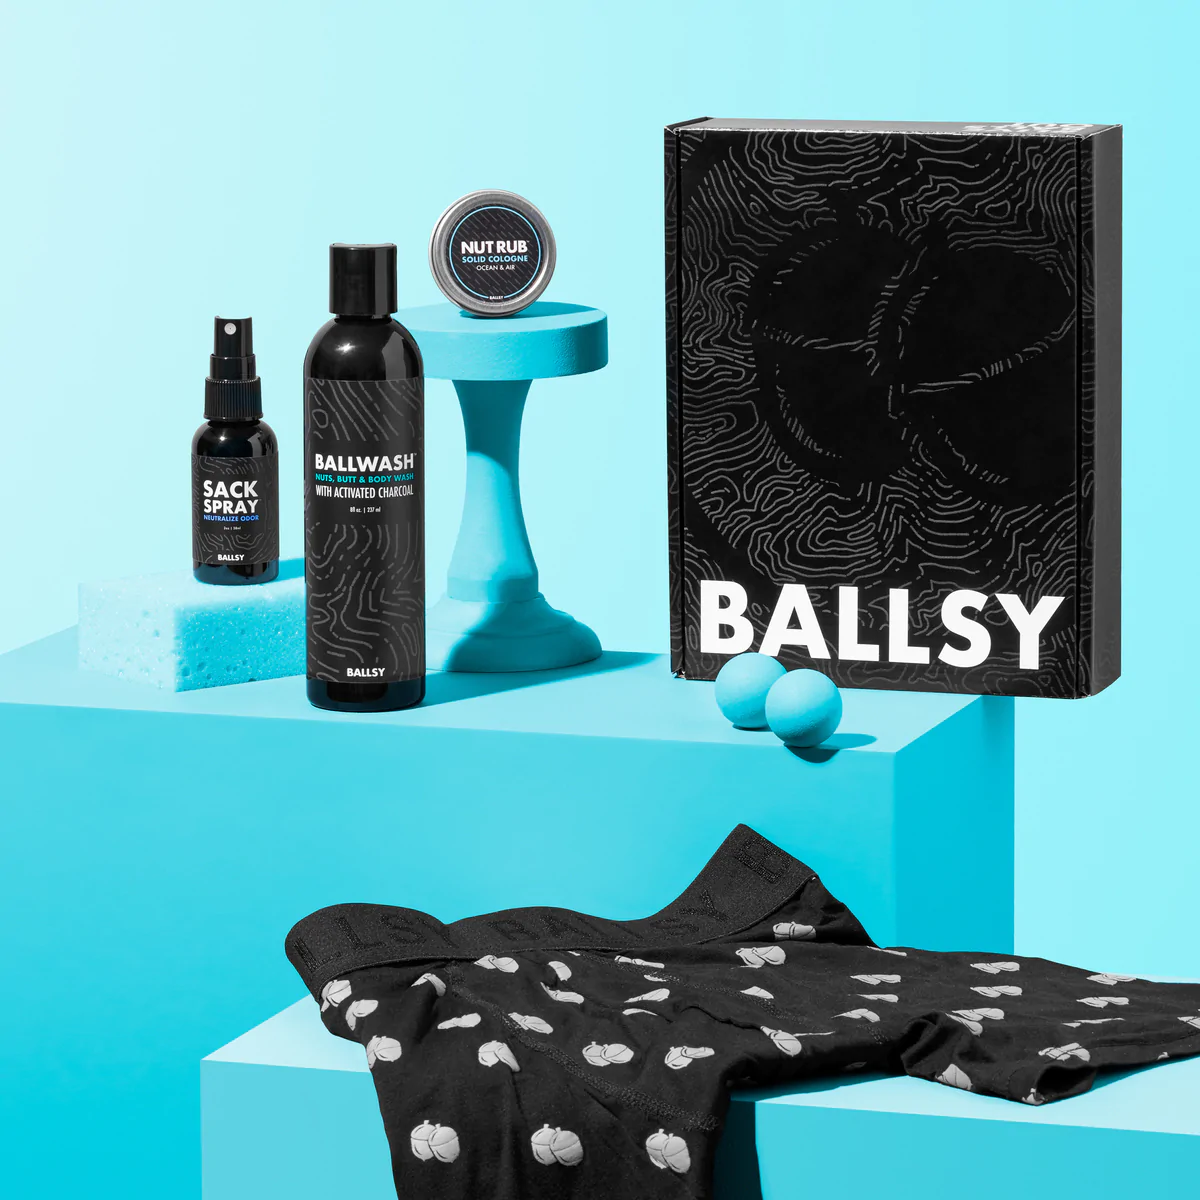 A set of personal care items from Ballsy along with a pair of underwear.